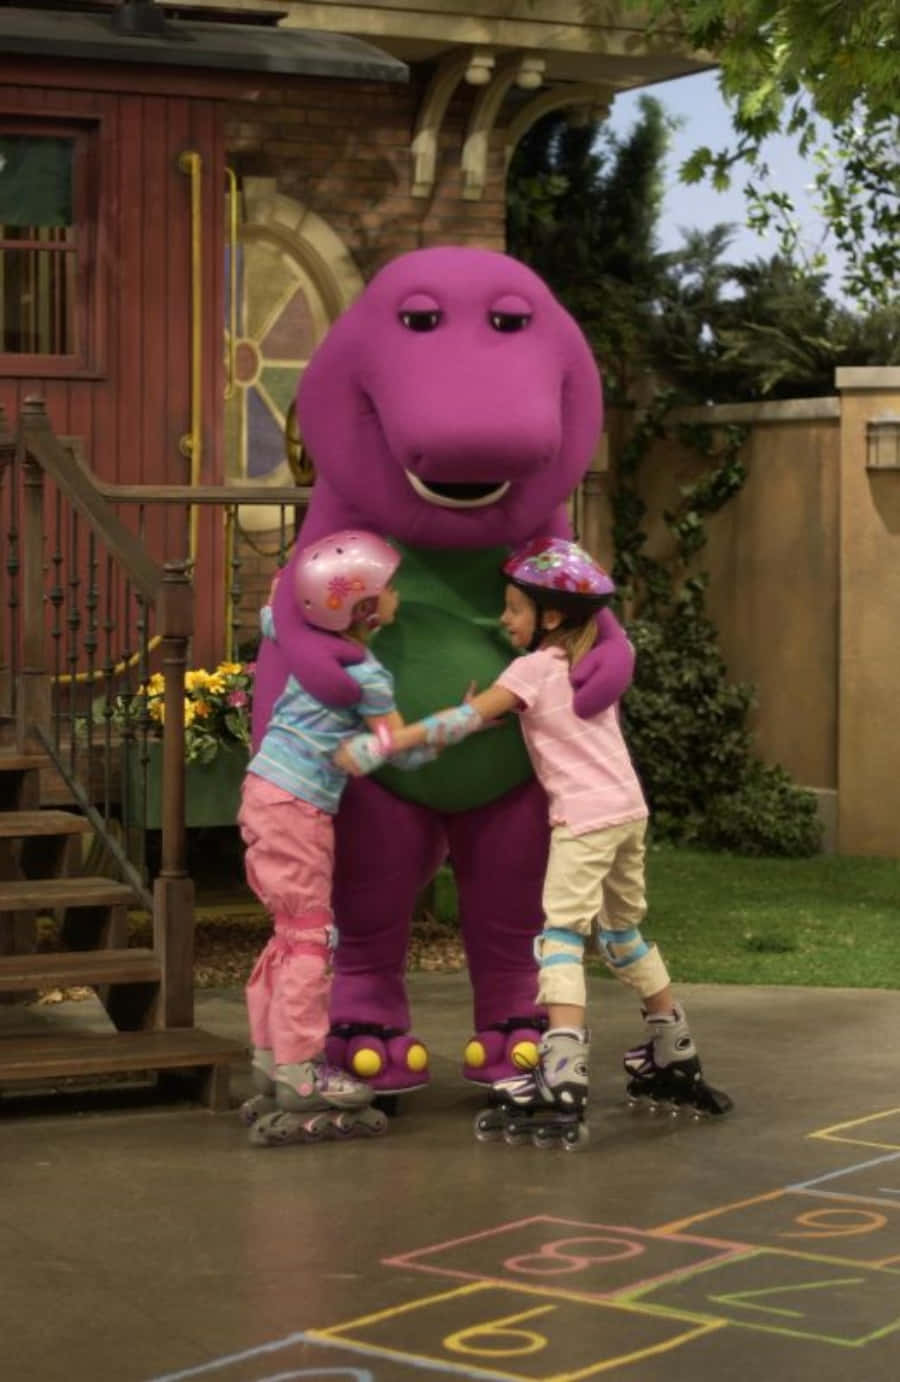 Imagining the Possibilities with Barney